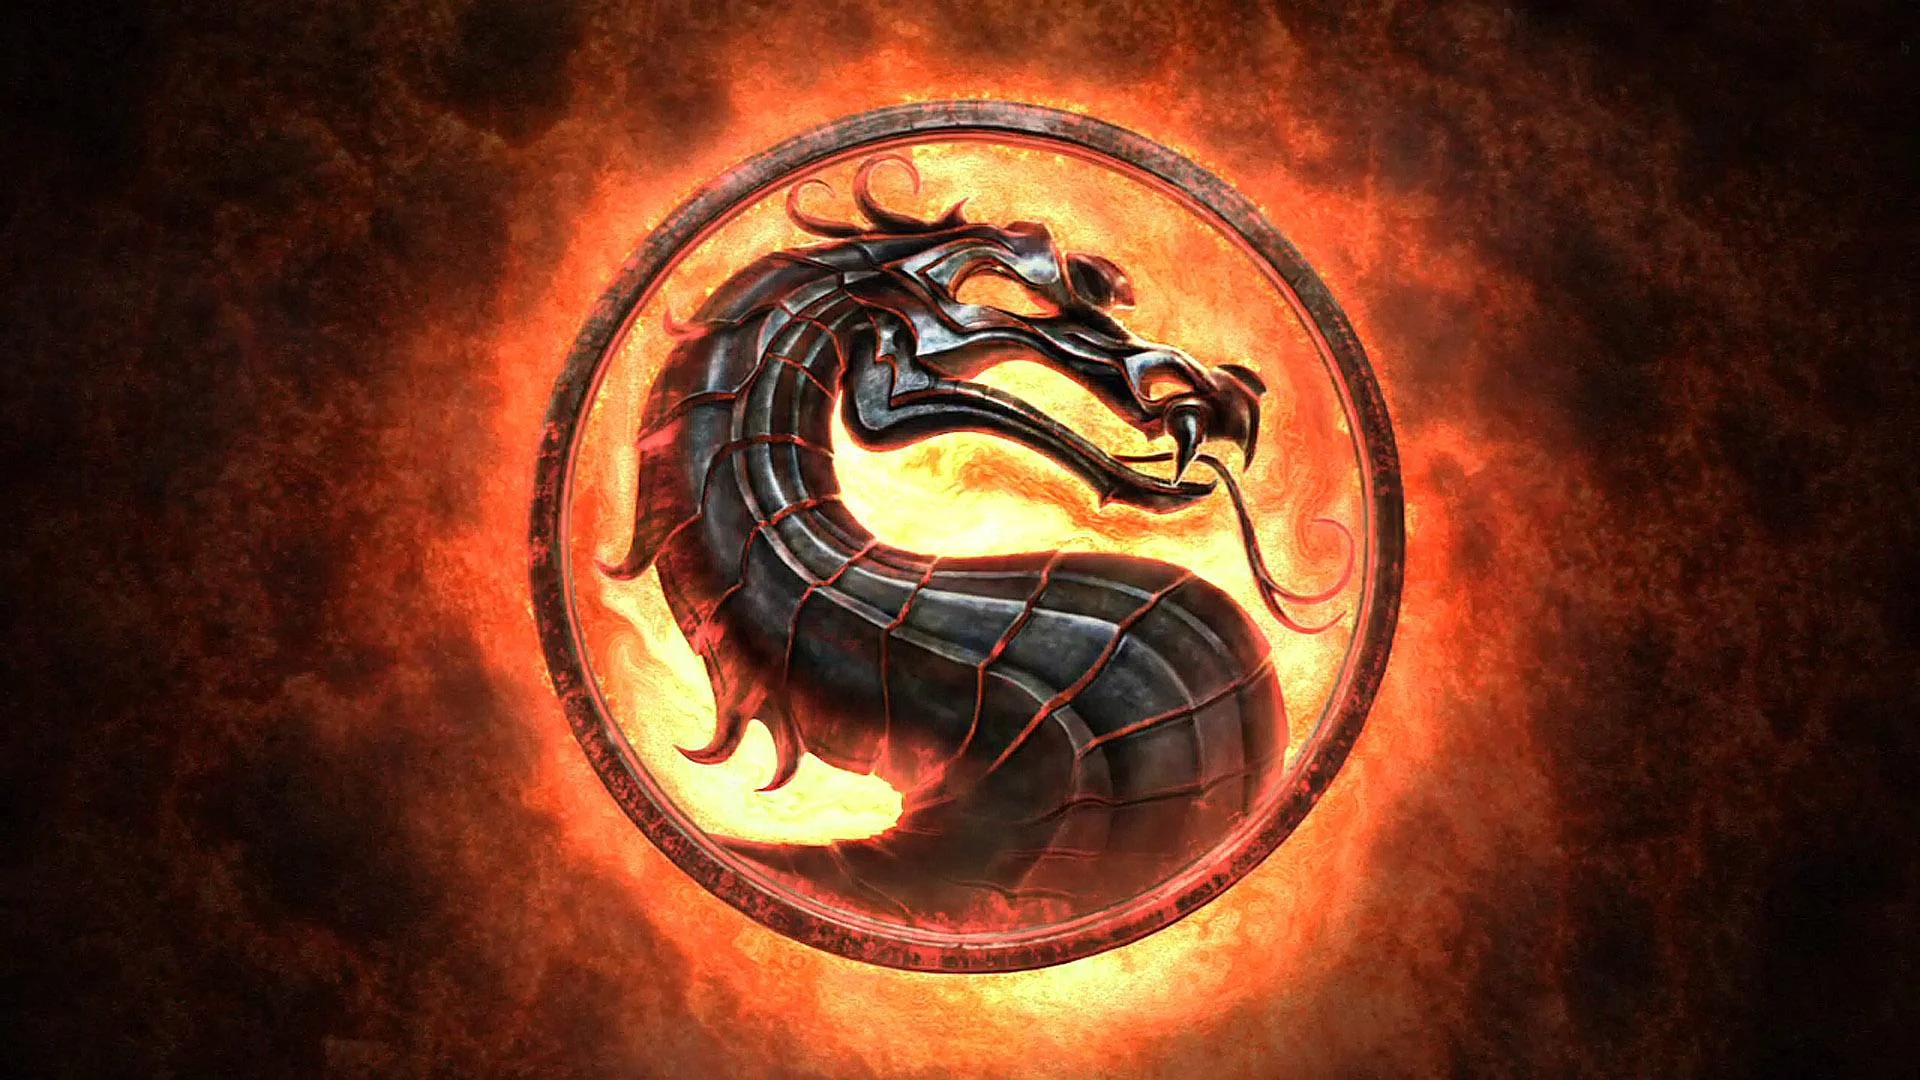 Mortal Kombat 12 Could Feature Peacemaker as a Guest Character – Rumour